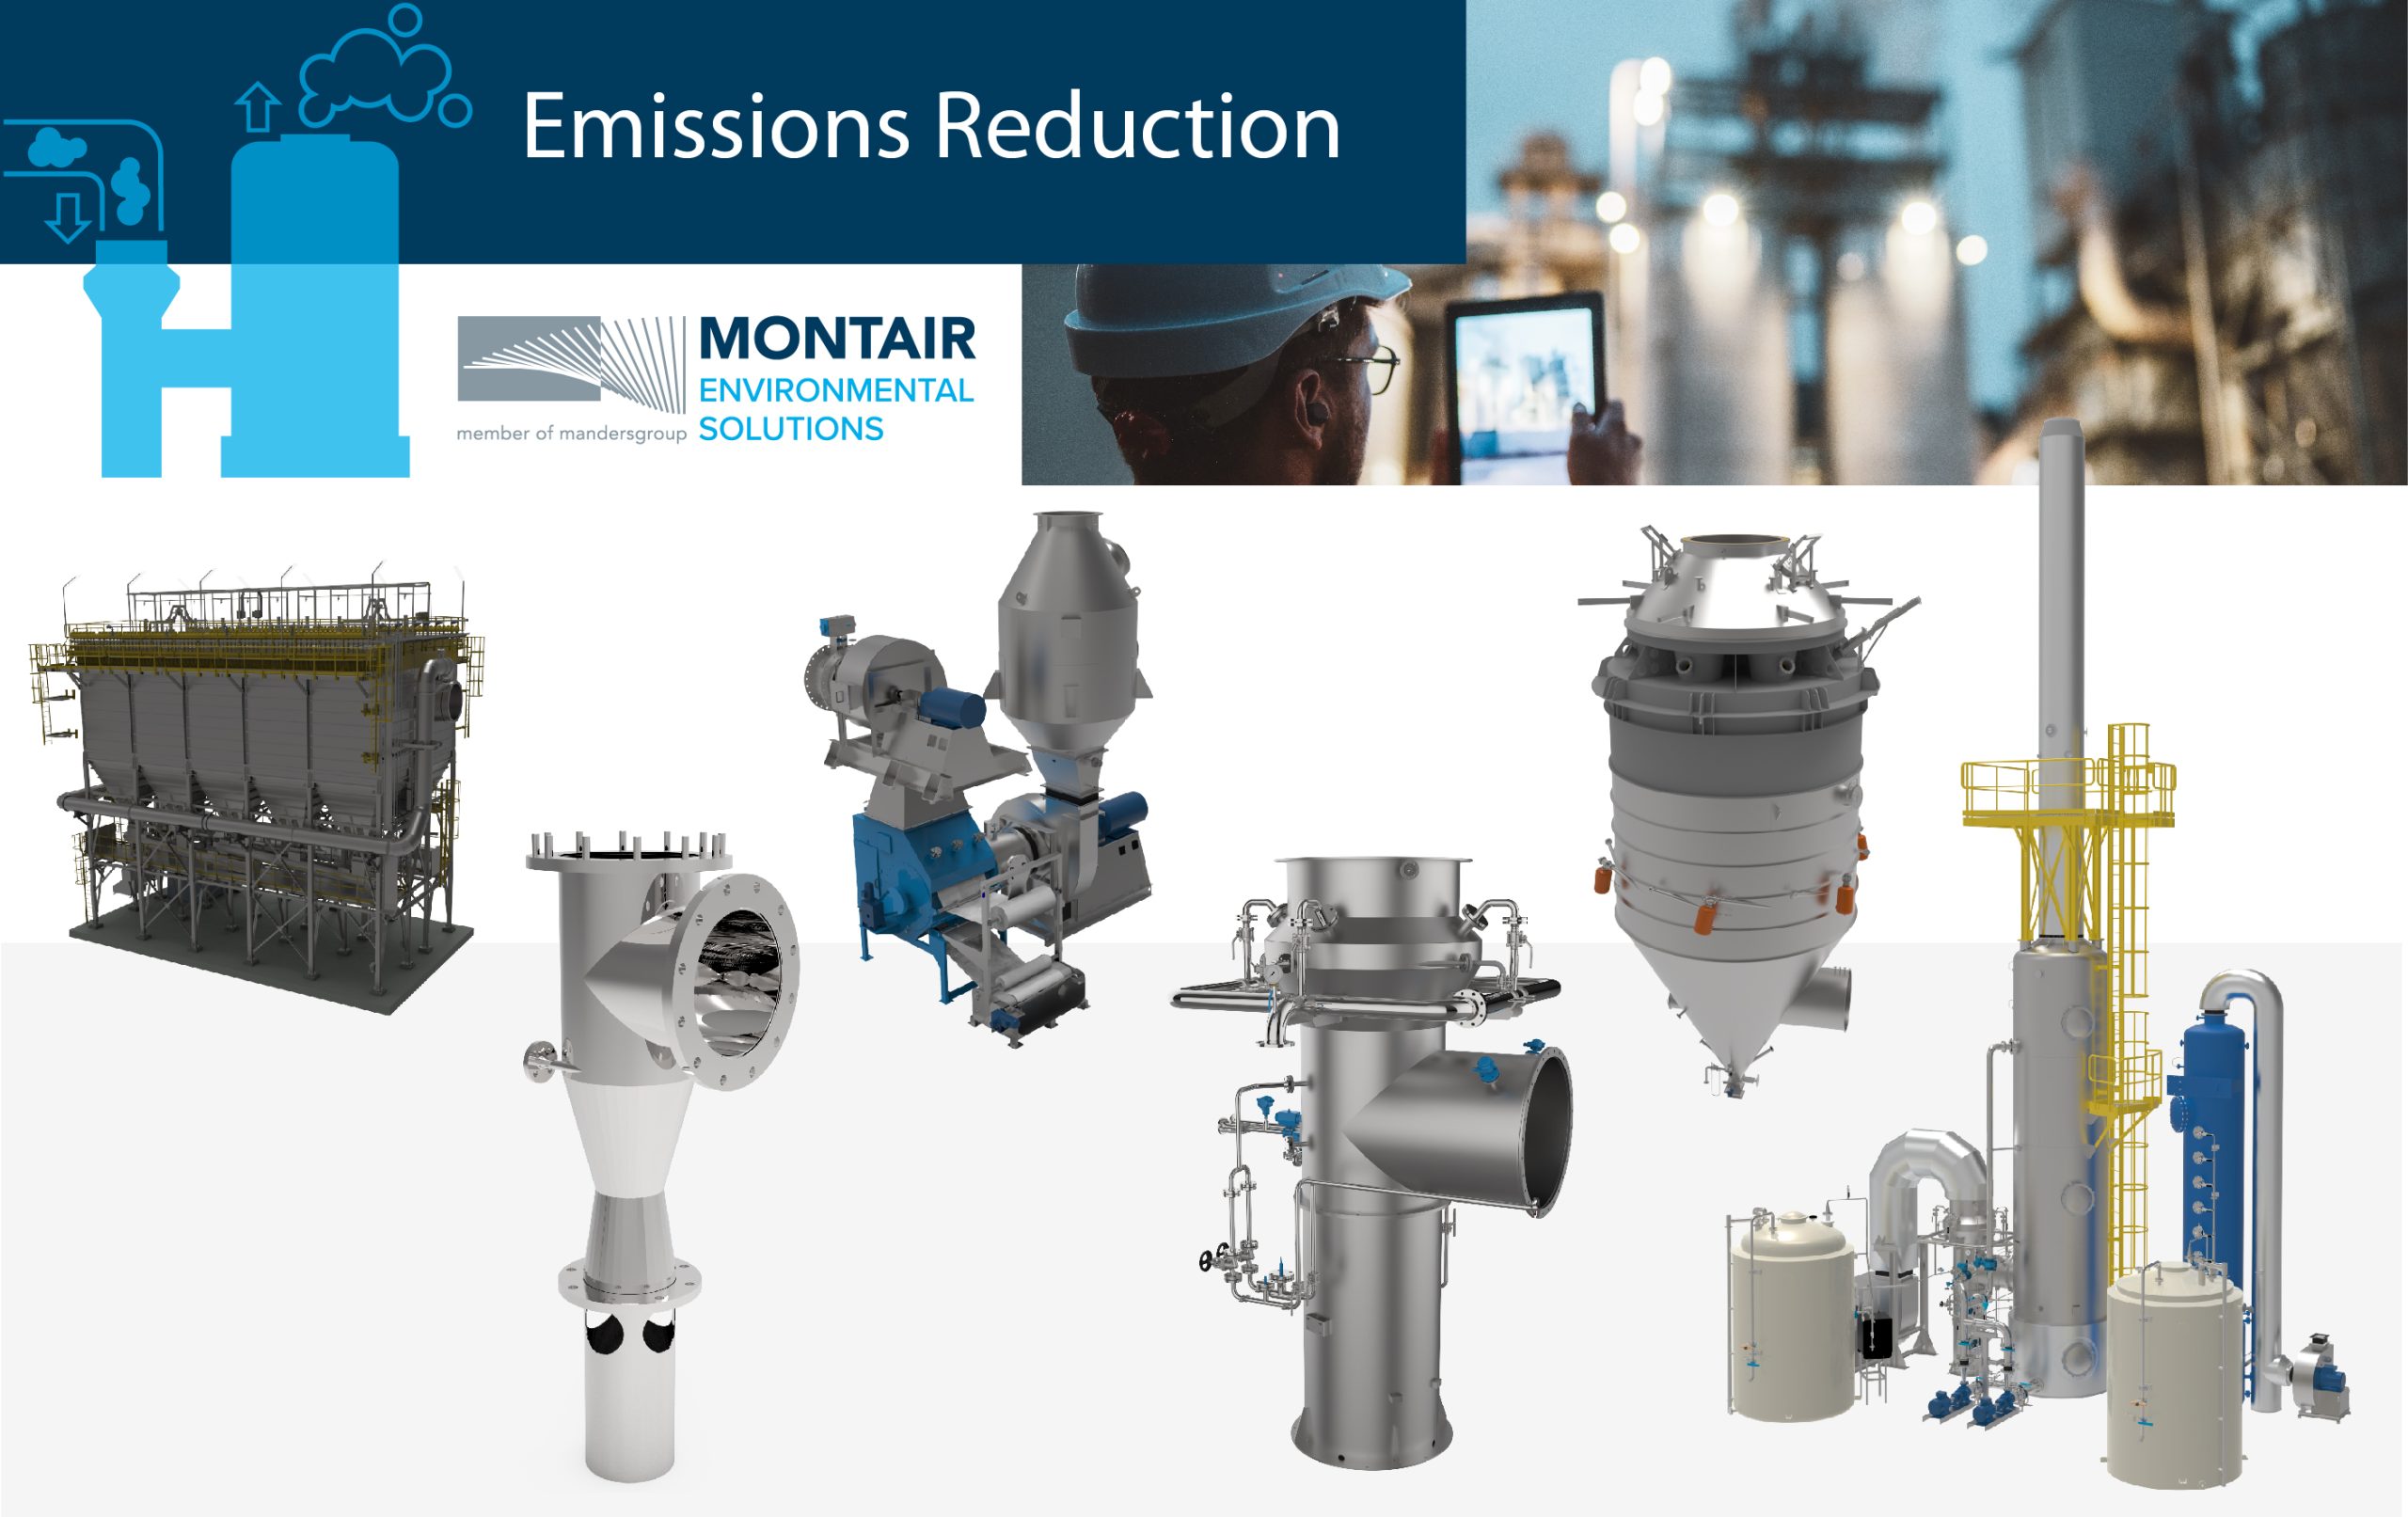 Montair Environmental Solutions - Emissions Reduction